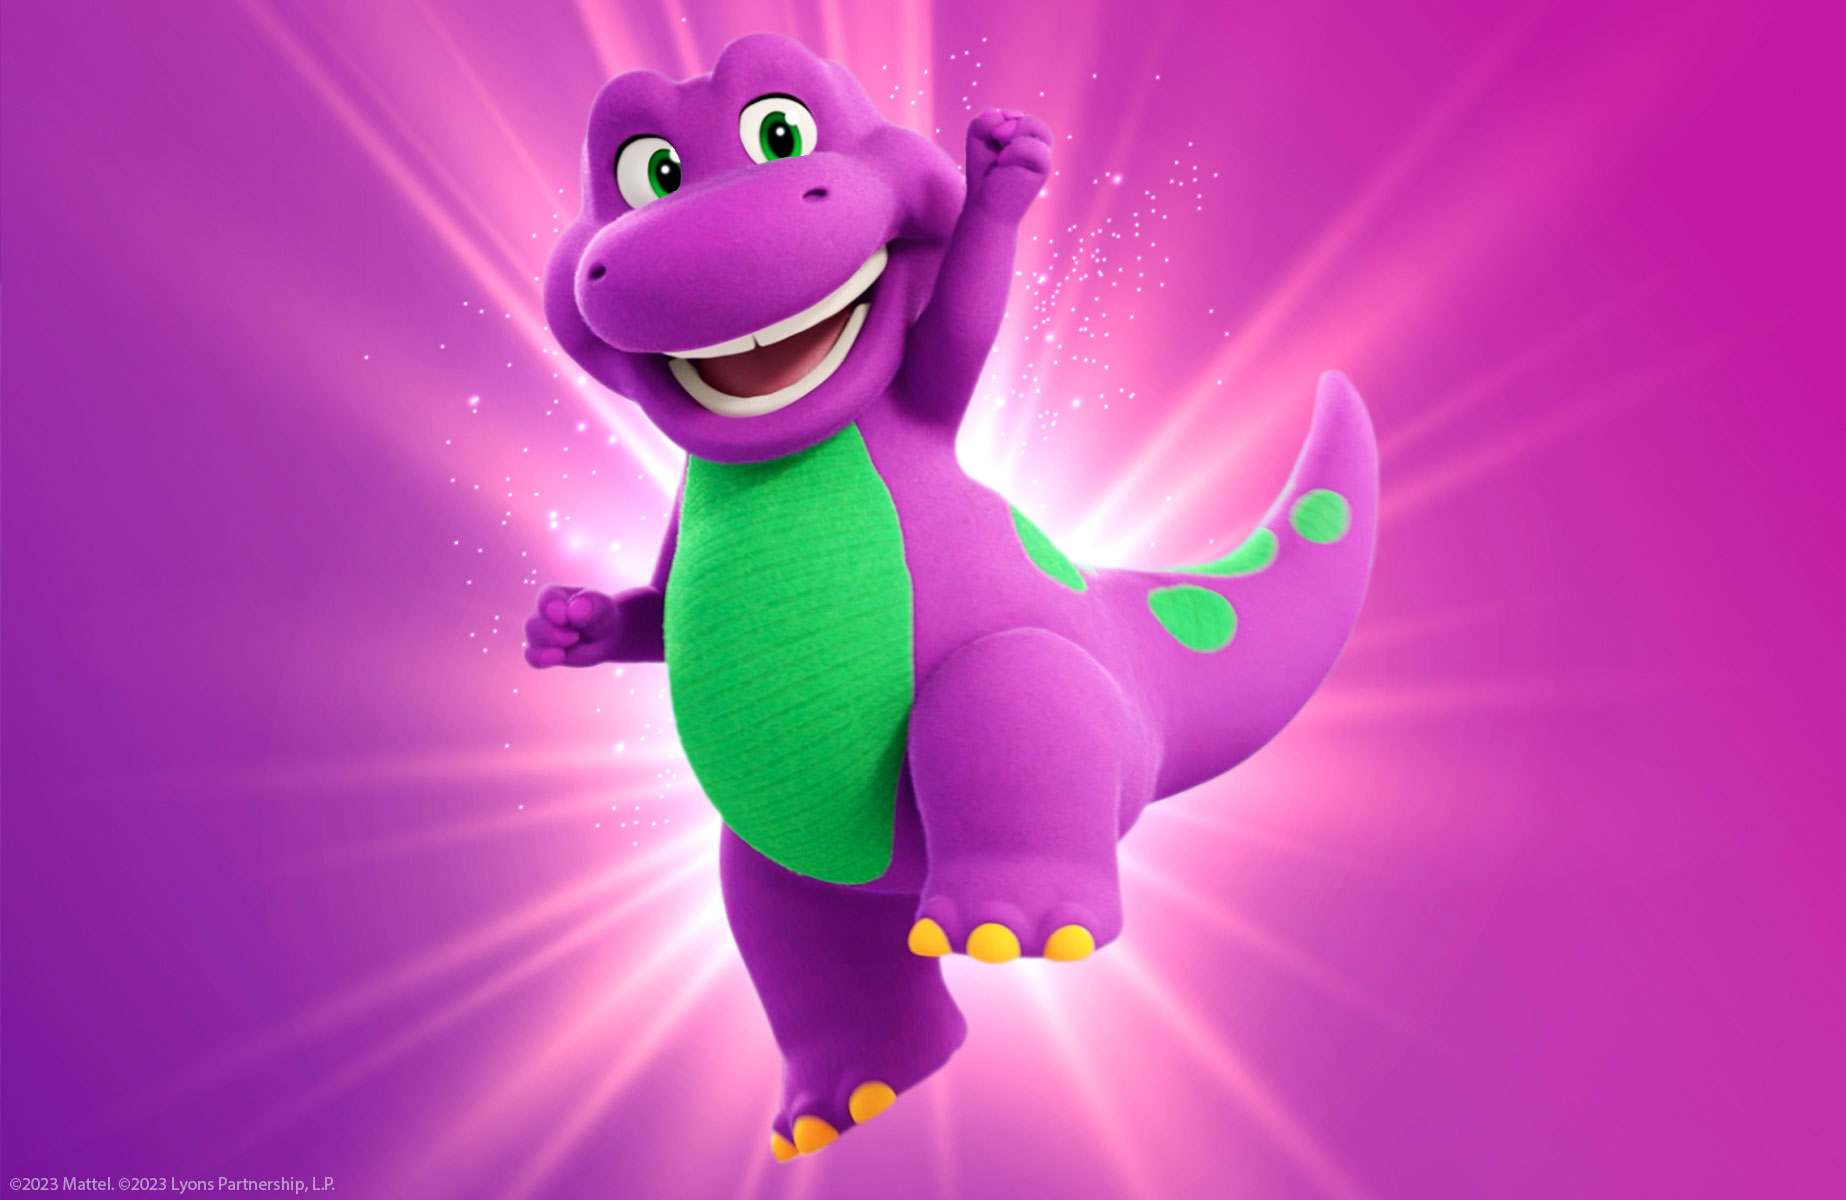 Mattel Is Relaunching Barney The Dinosaur As A CG Animated Series